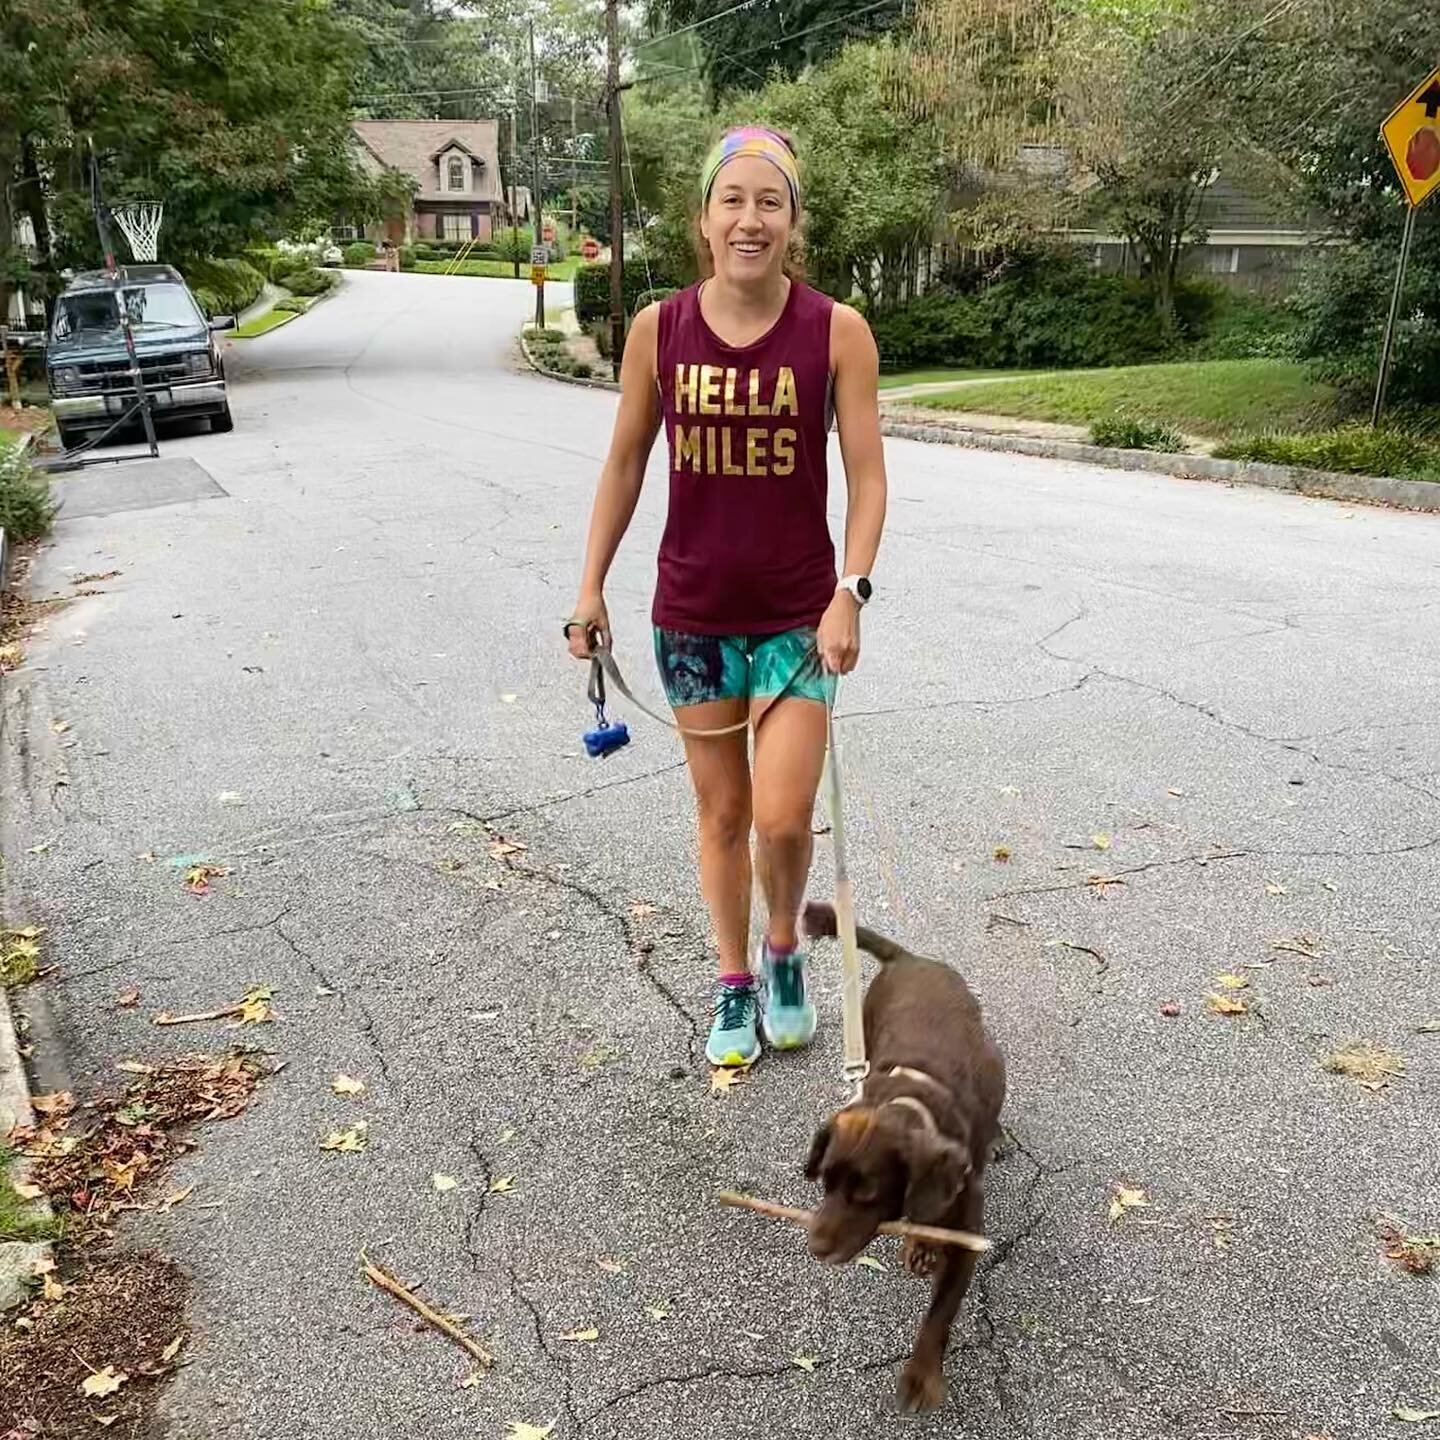 Saturday Strength + short walk. All with my best pal. 🐶 He&rsquo;s gotta have a stick 😂.⁣
⁣
Positives and Negatives. 👎🏼 first to end on a high note. I hadn&rsquo;t put sneakers on in two weeks - my foot is fine walking around barefoot, but I stil